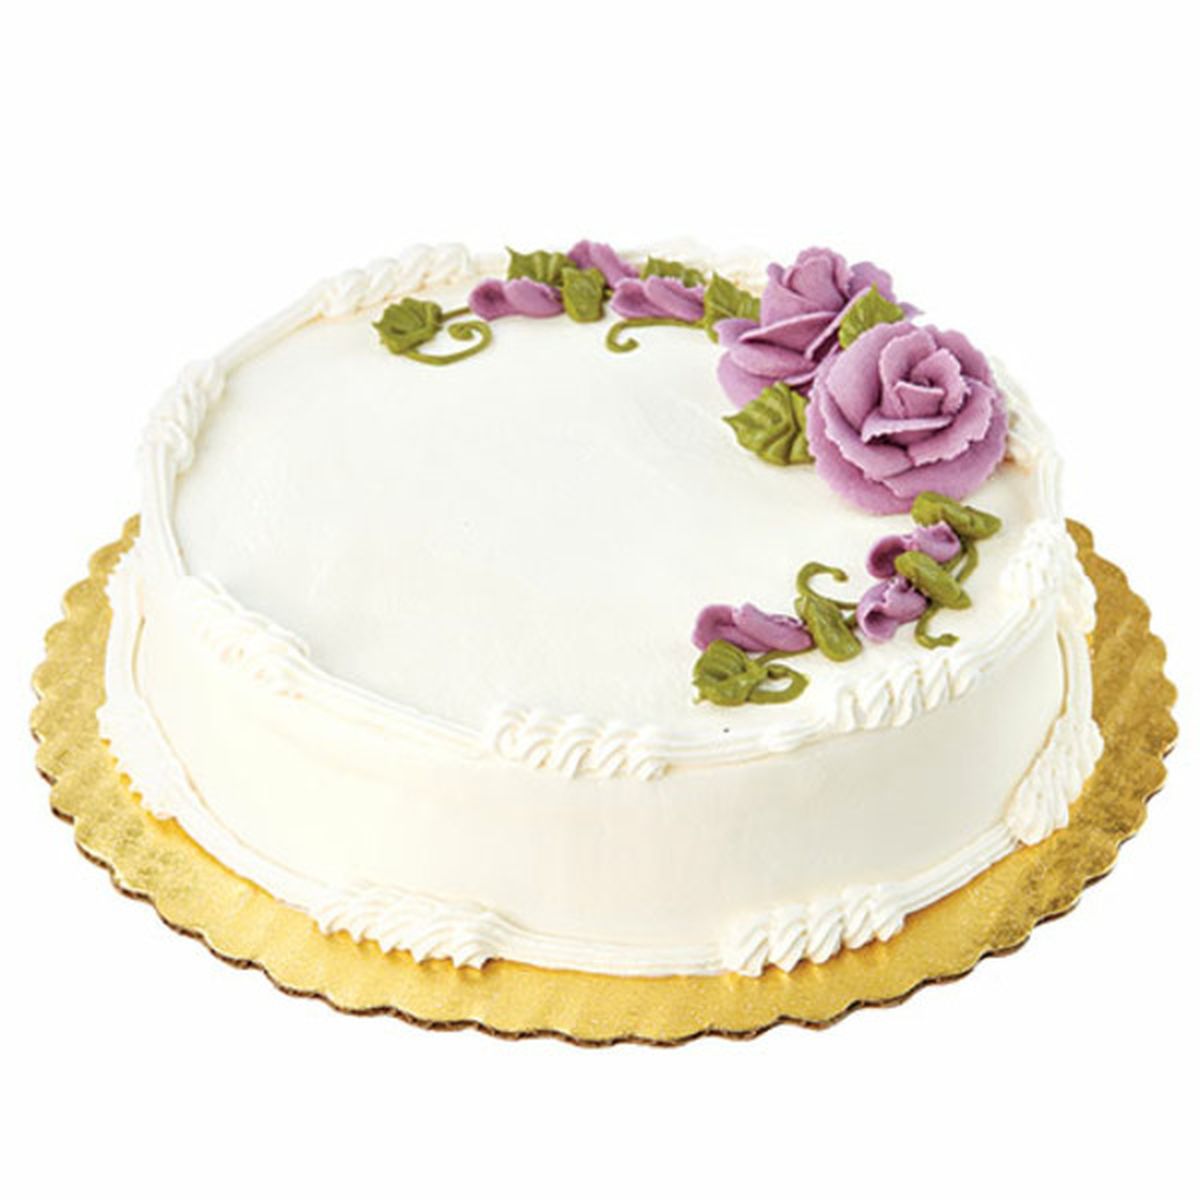 Calories in Wegmans Round 1 Layer Gold Cake with Buttercreme